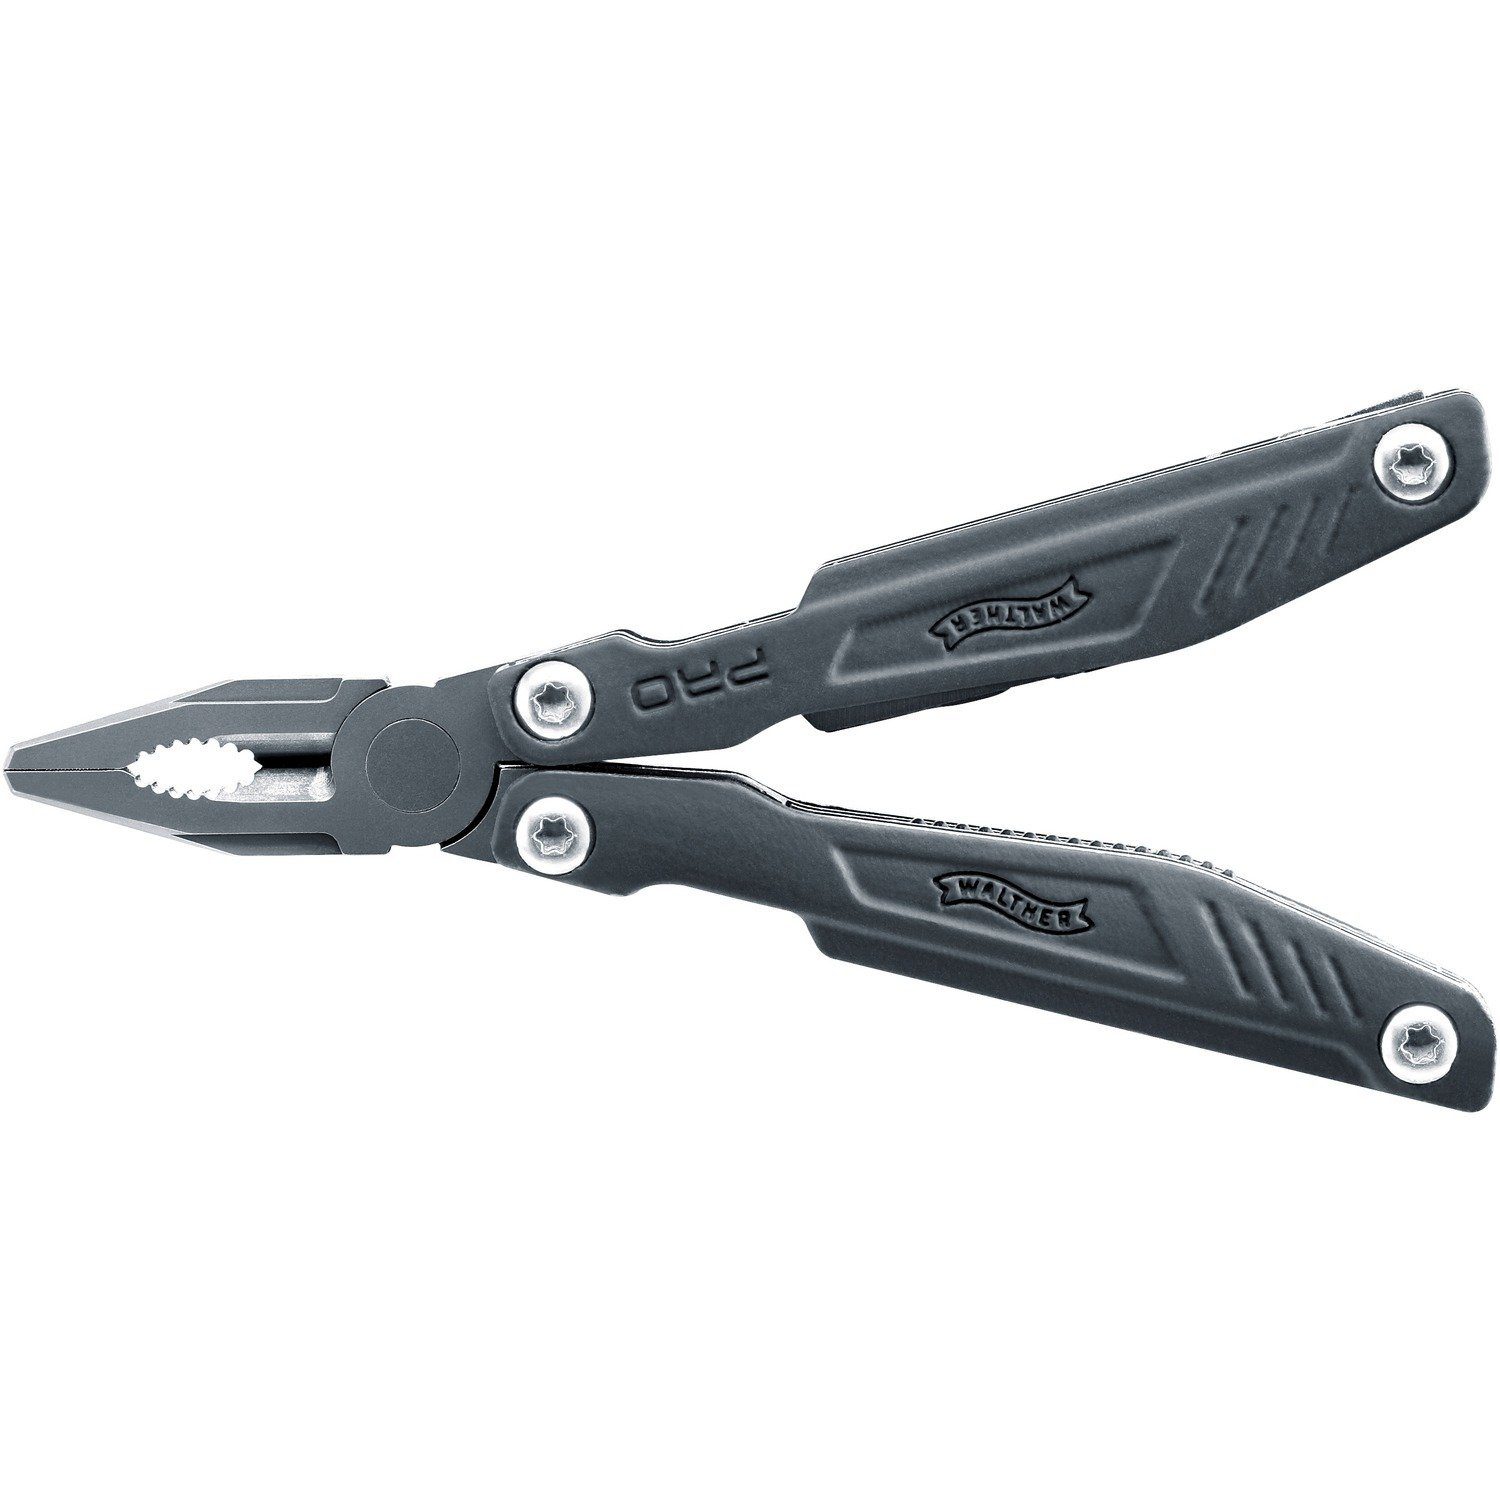 Multitool Walther Tooltac Multitool S Pro